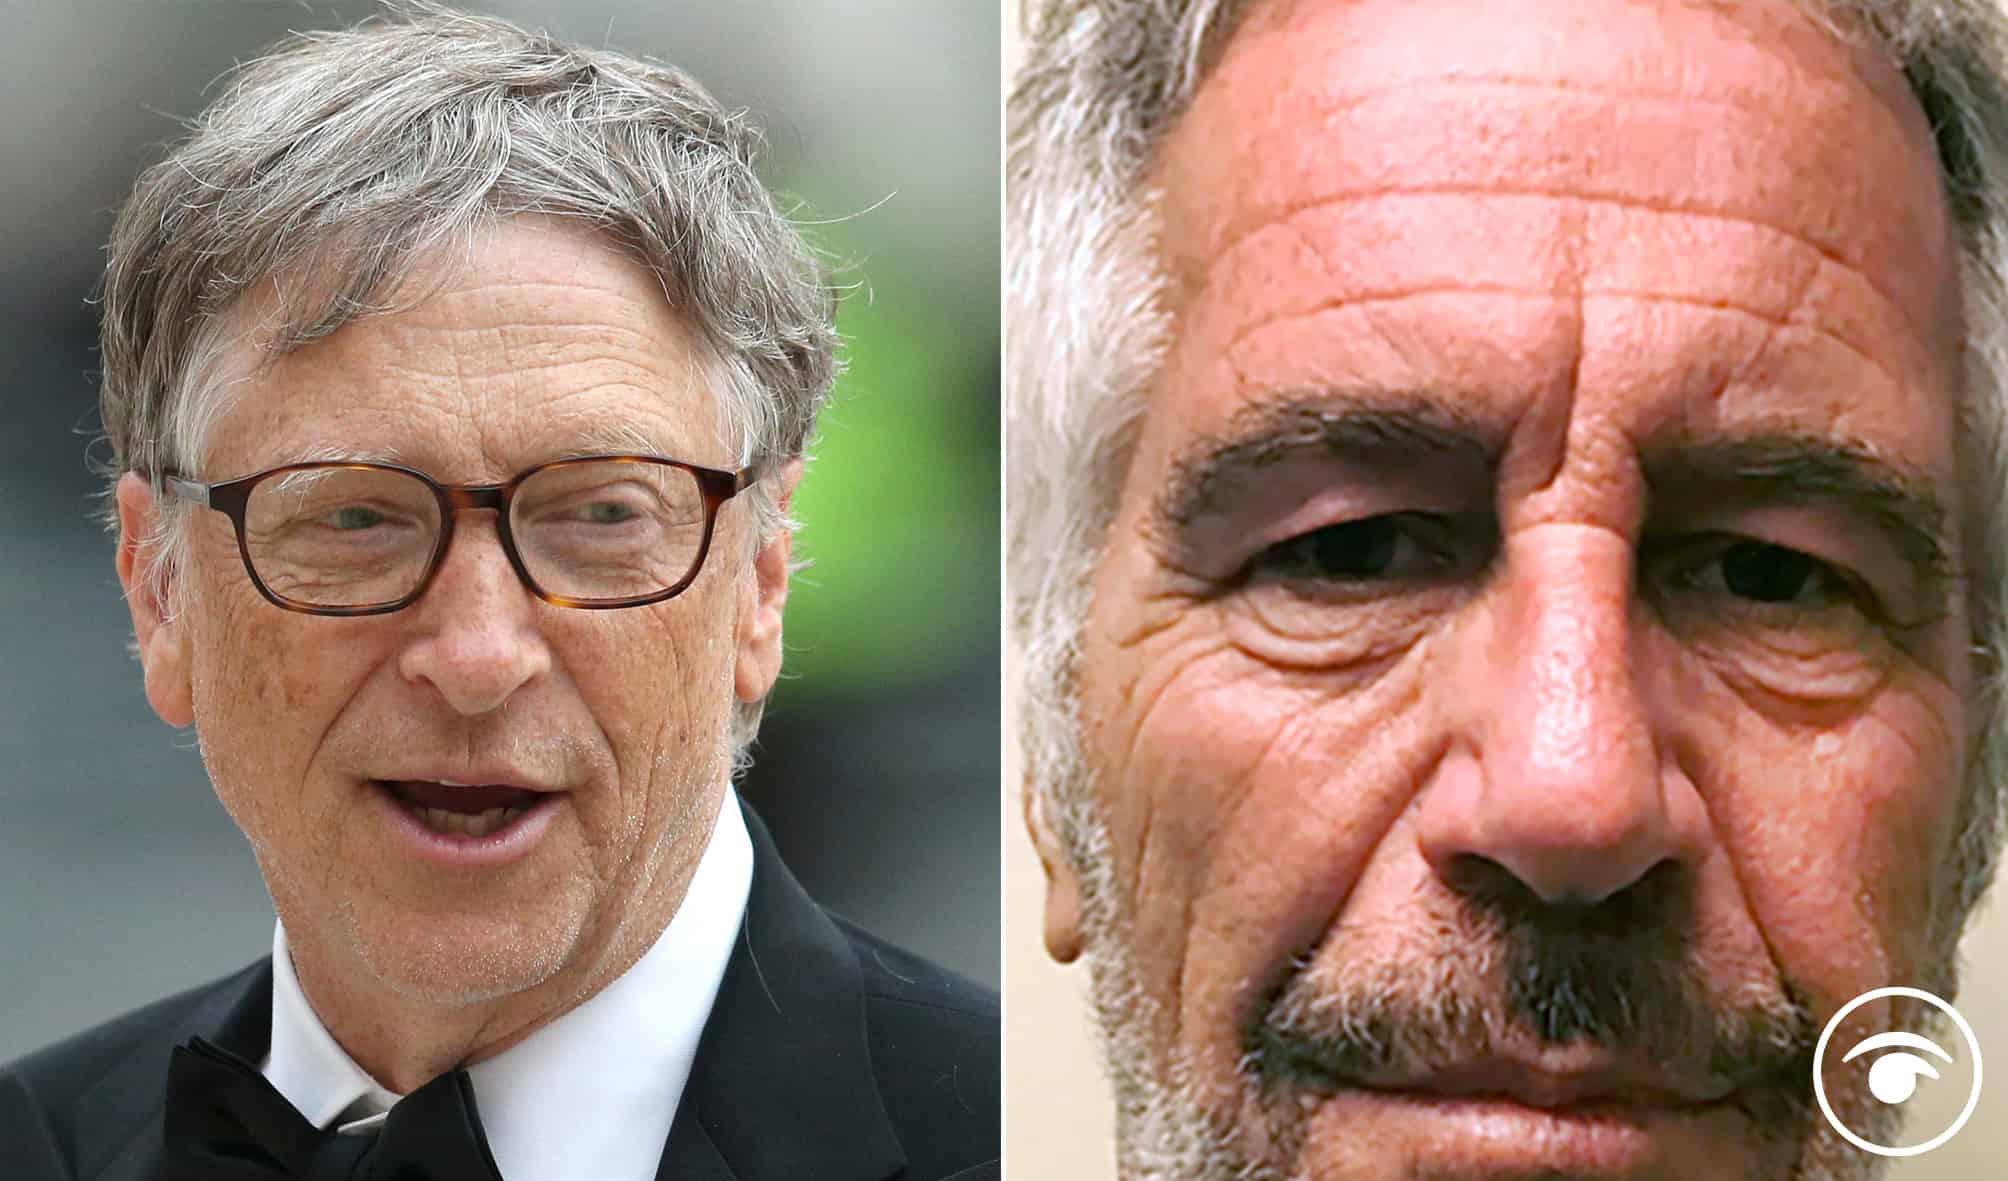 Watch: Bill Gates admits he met Epstein after sex conviction and reason will give you the chills